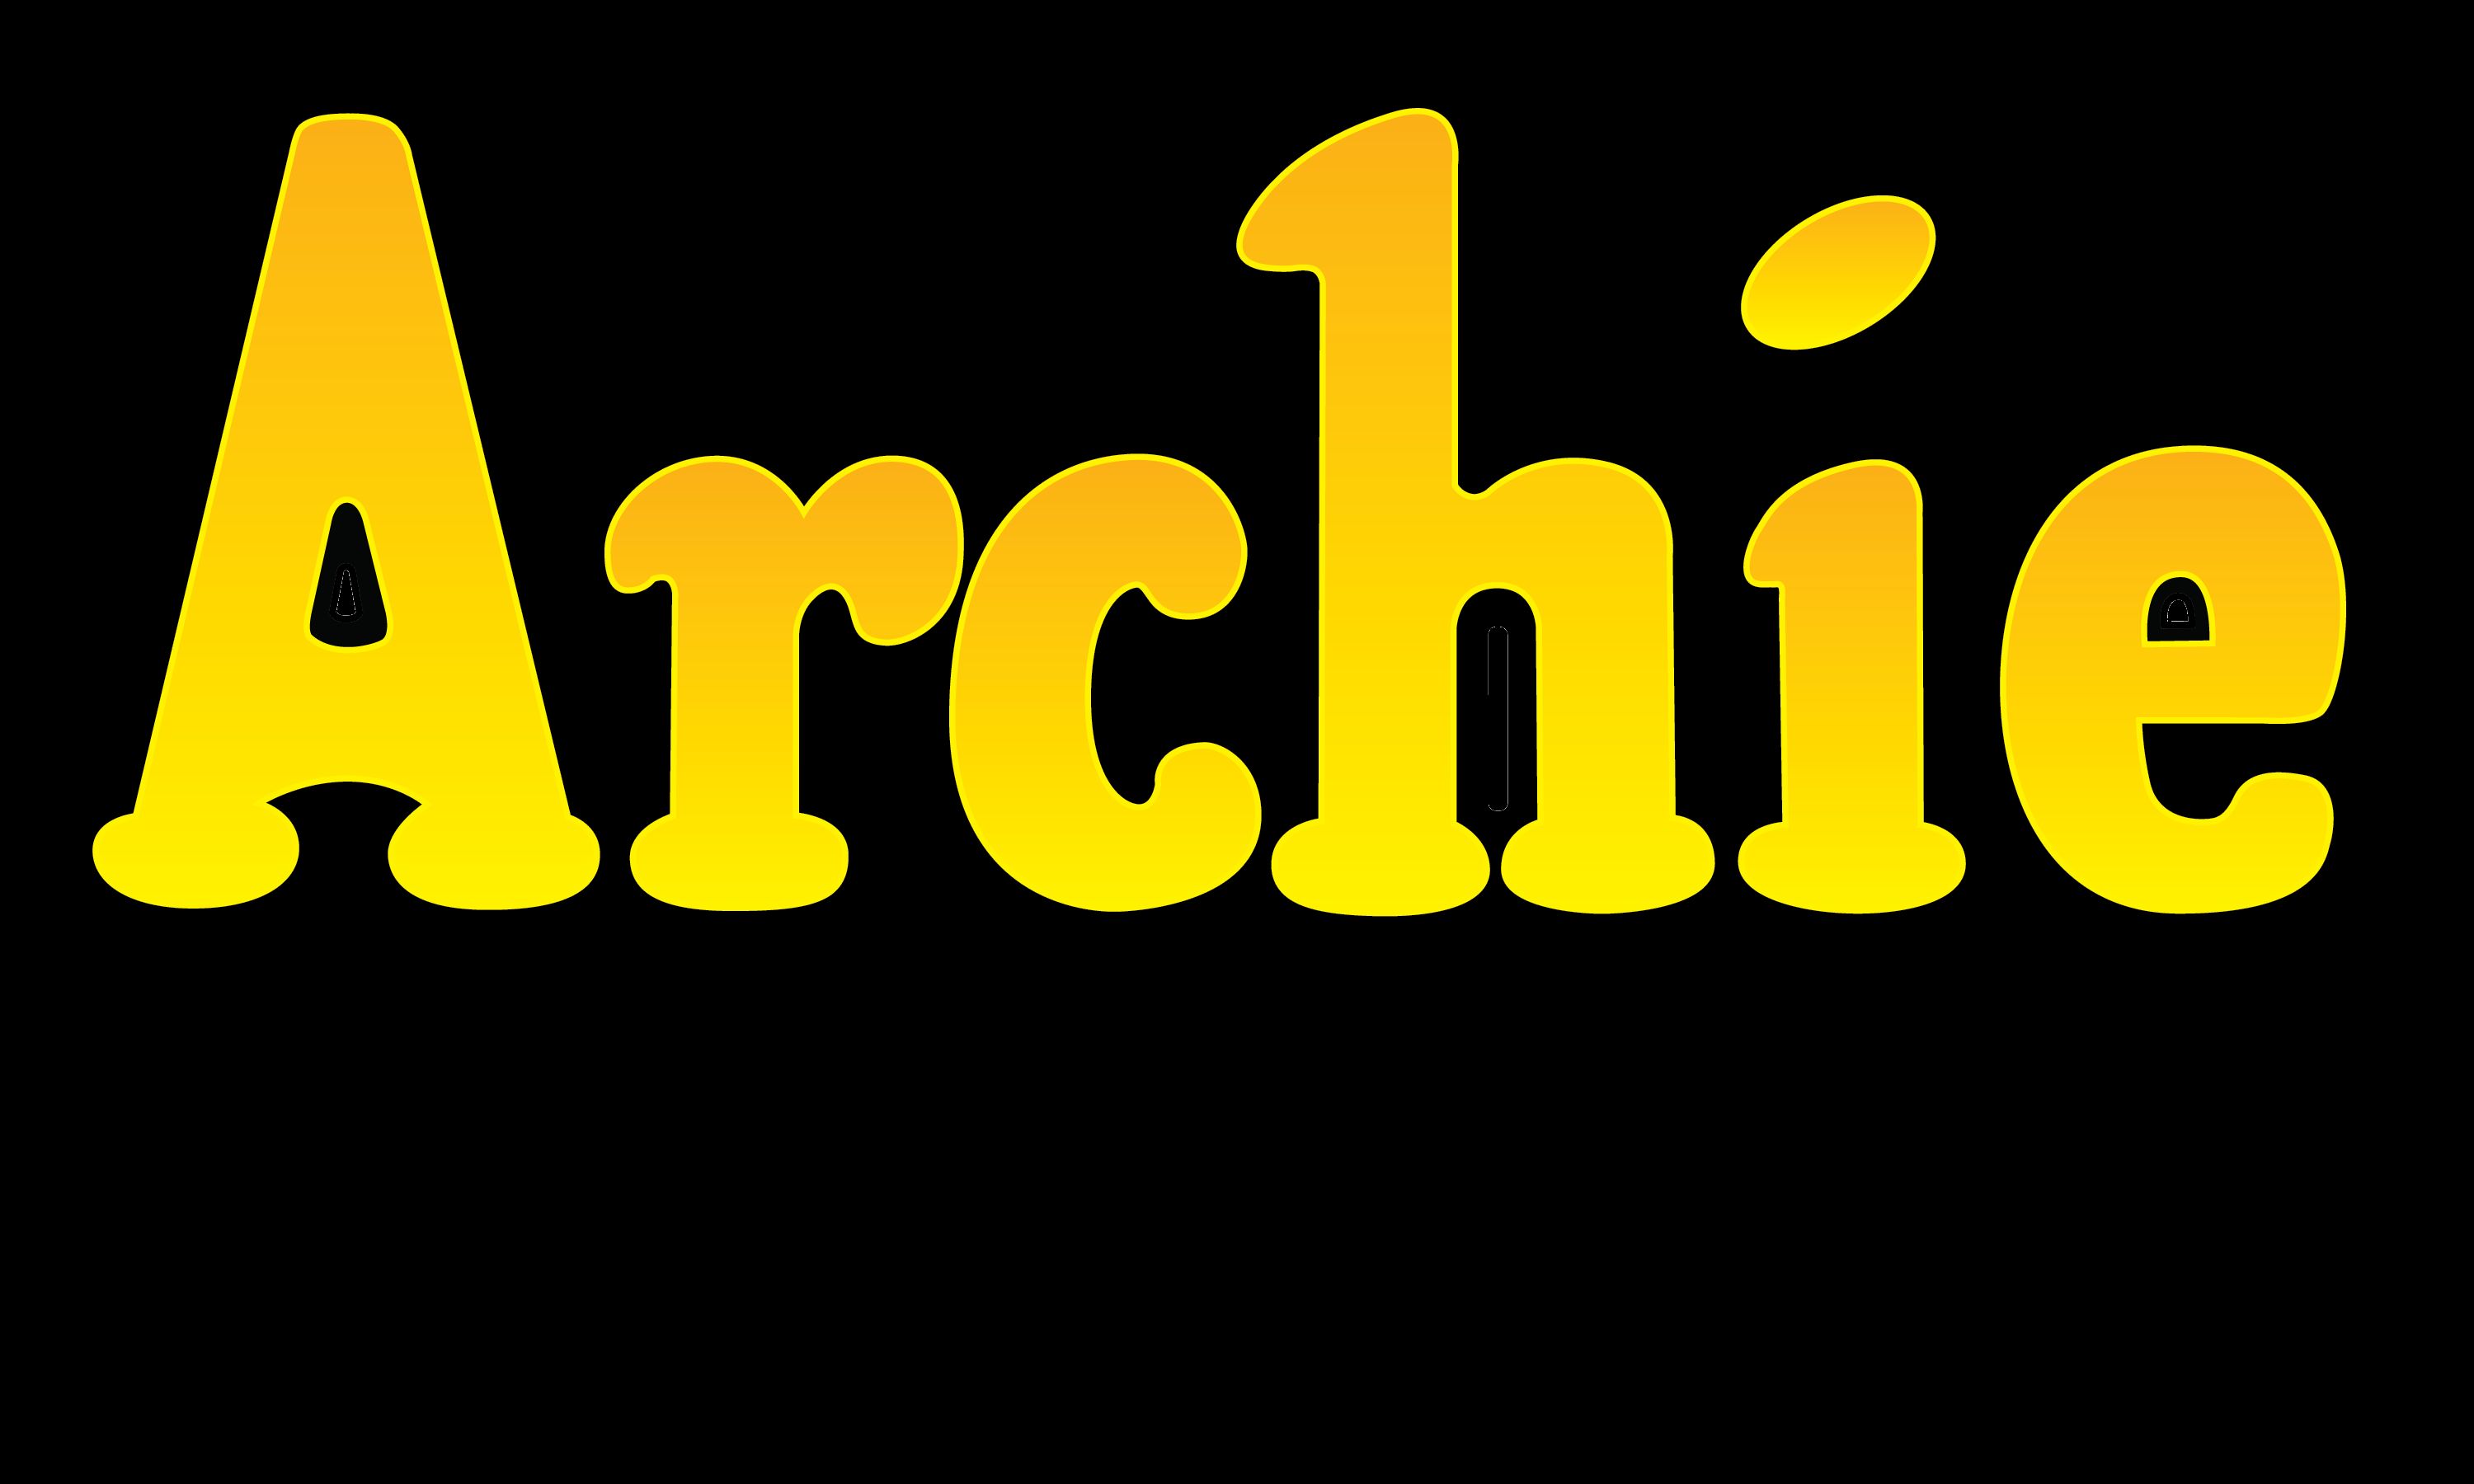 Archies - Crunchbase Company Profile & Funding